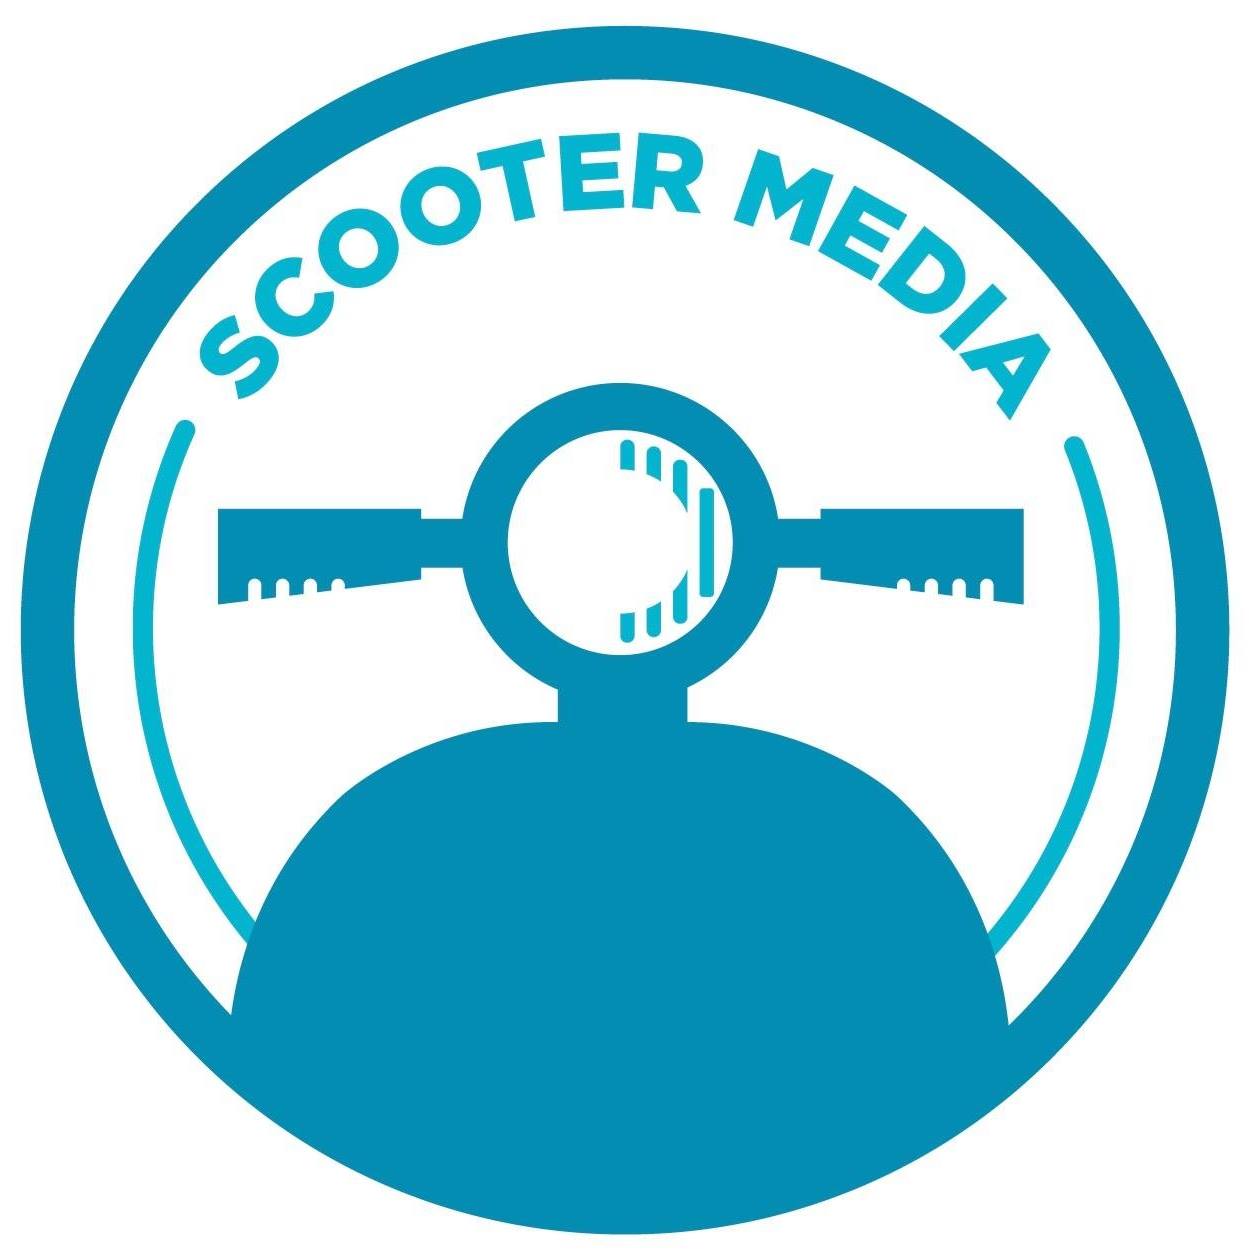 Scooter Media